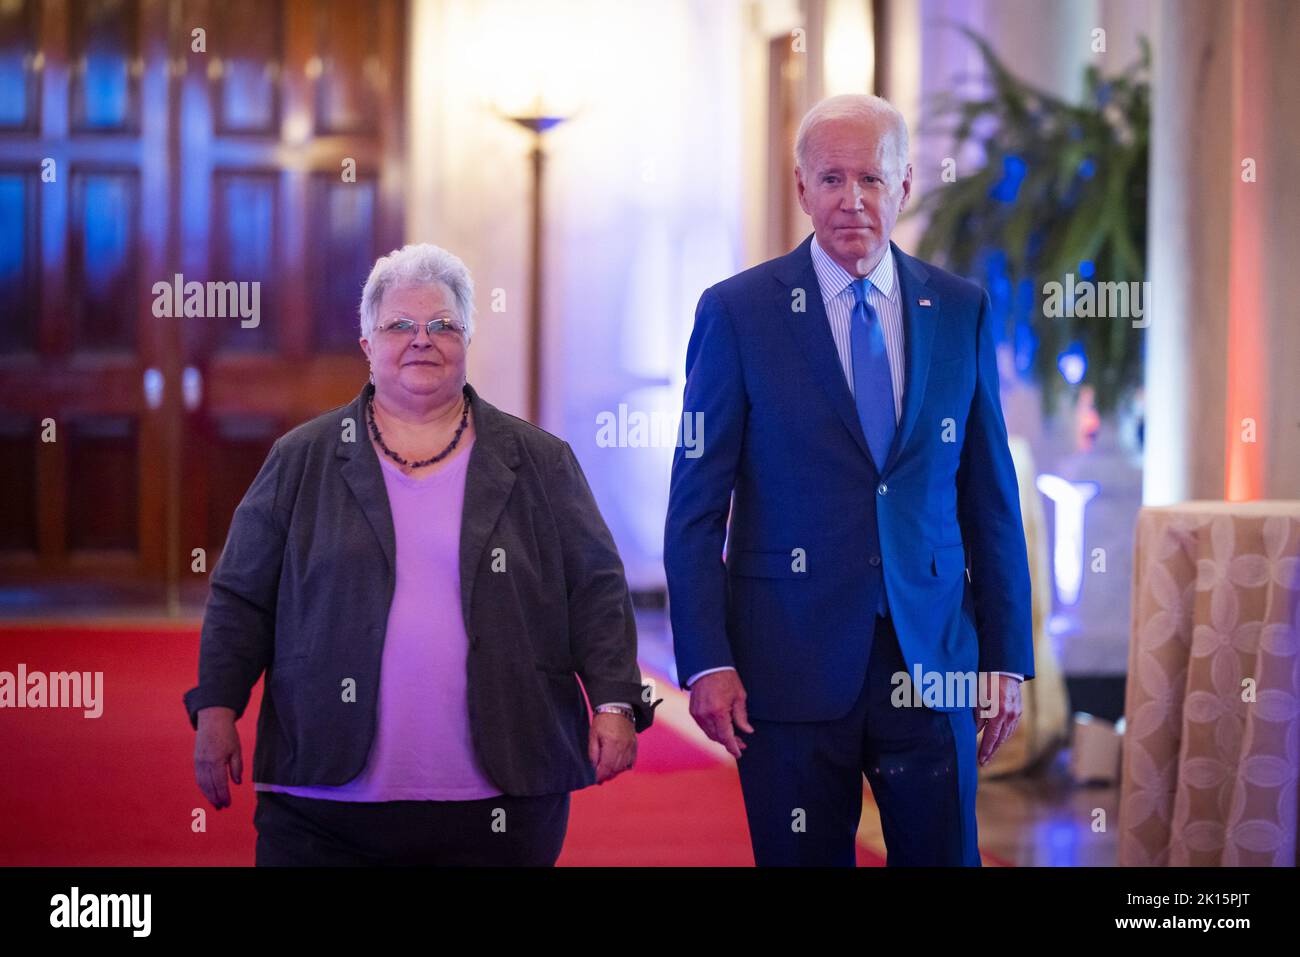 Washington DC, USA. 15th Sep, 2022. President Joe Biden along with Susan Bro prepare to speak at the United We Stand Summit in the East Room of the White House in Washington, DC on Thursday, September 15, 2022. Bro is the mother of Heather Heyer, who was killed at the Unite the Right rally in Charlottesville, Virginia in 2017. Photo by Jim Lo Scalzo/UPI Credit: UPI/Alamy Live News Stock Photo